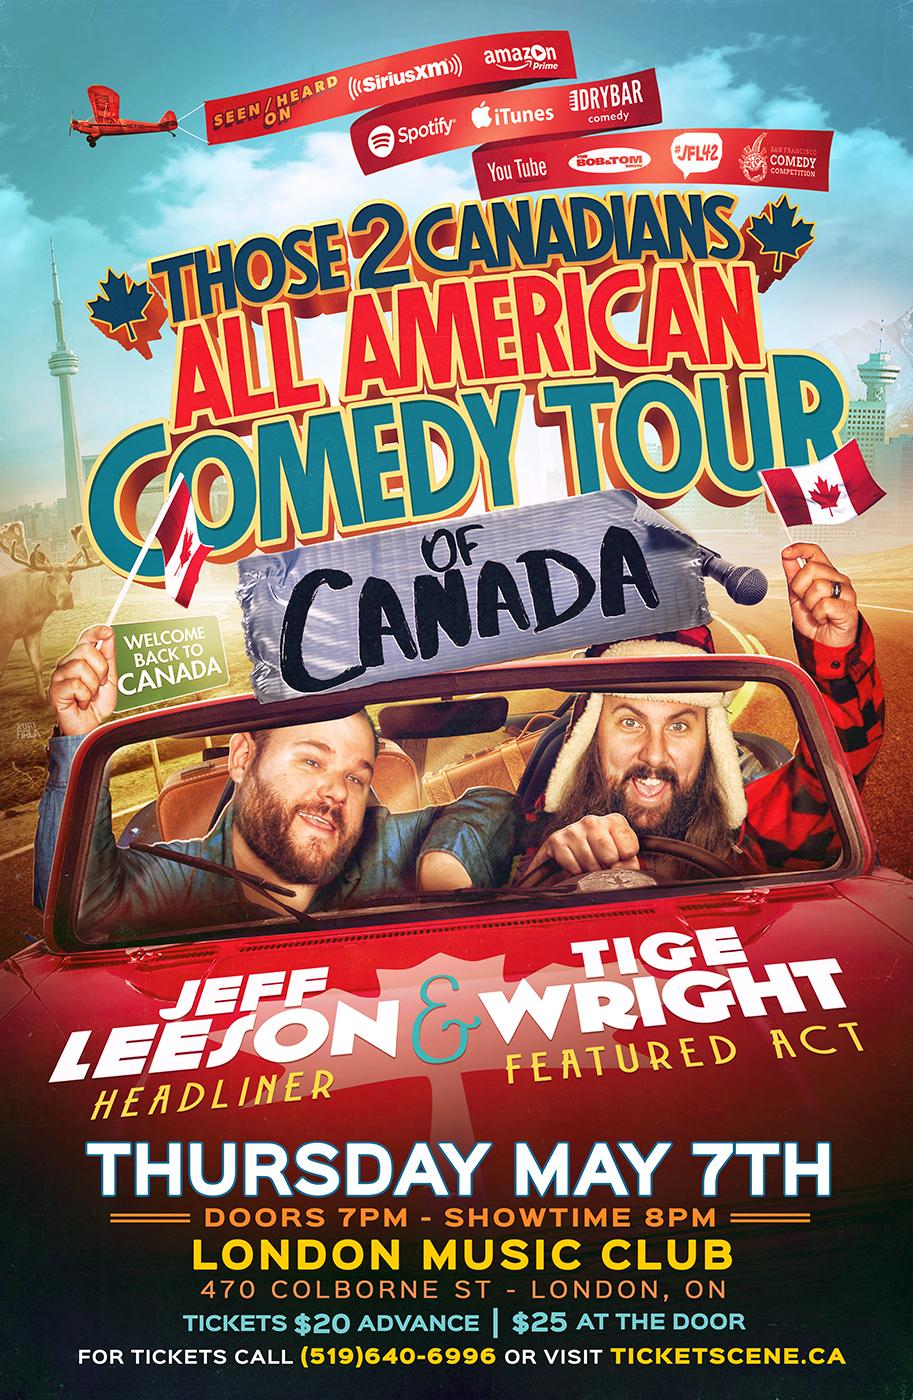 THOSE 2 CANADIANS ALL AMERICAN COMEDY TOUR OF CANADA - Jeff Leeson / Tige Wright 